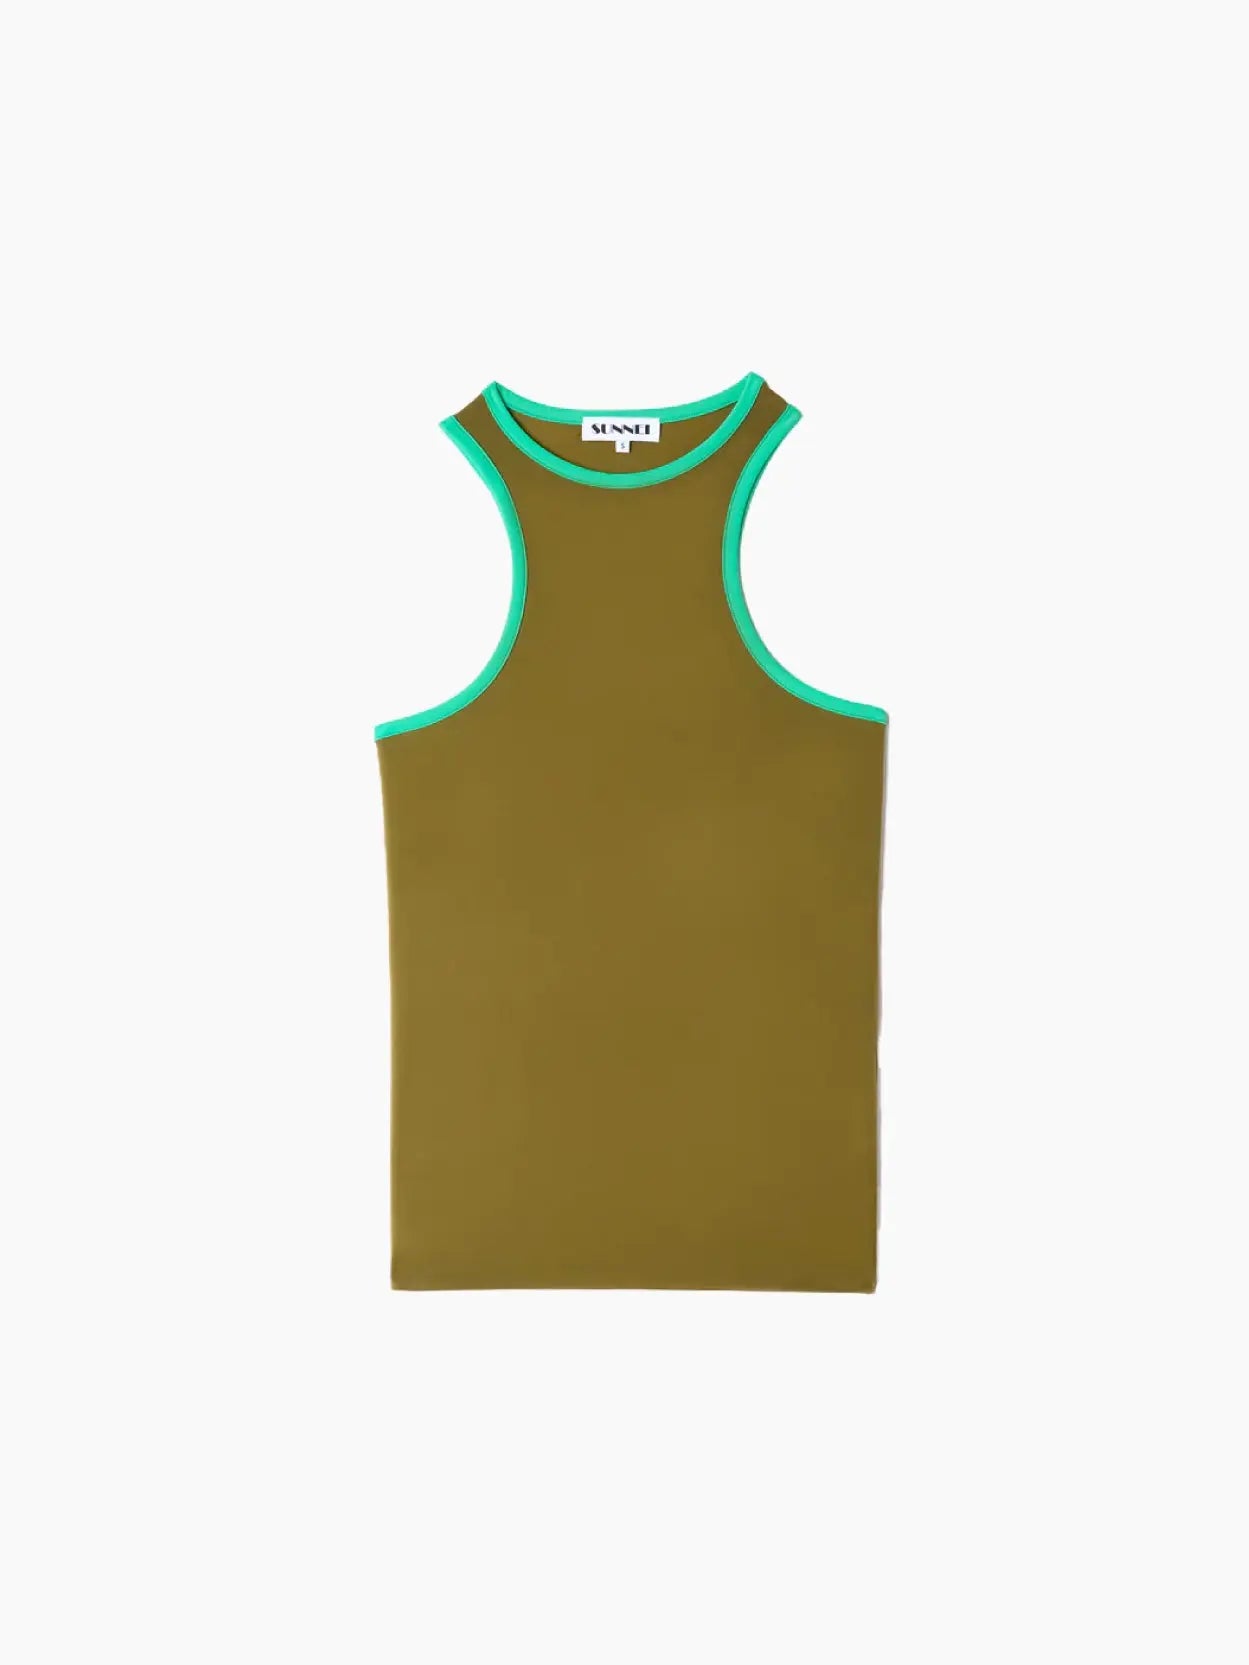 Stretchy Halter Top Olive Green Sunnei